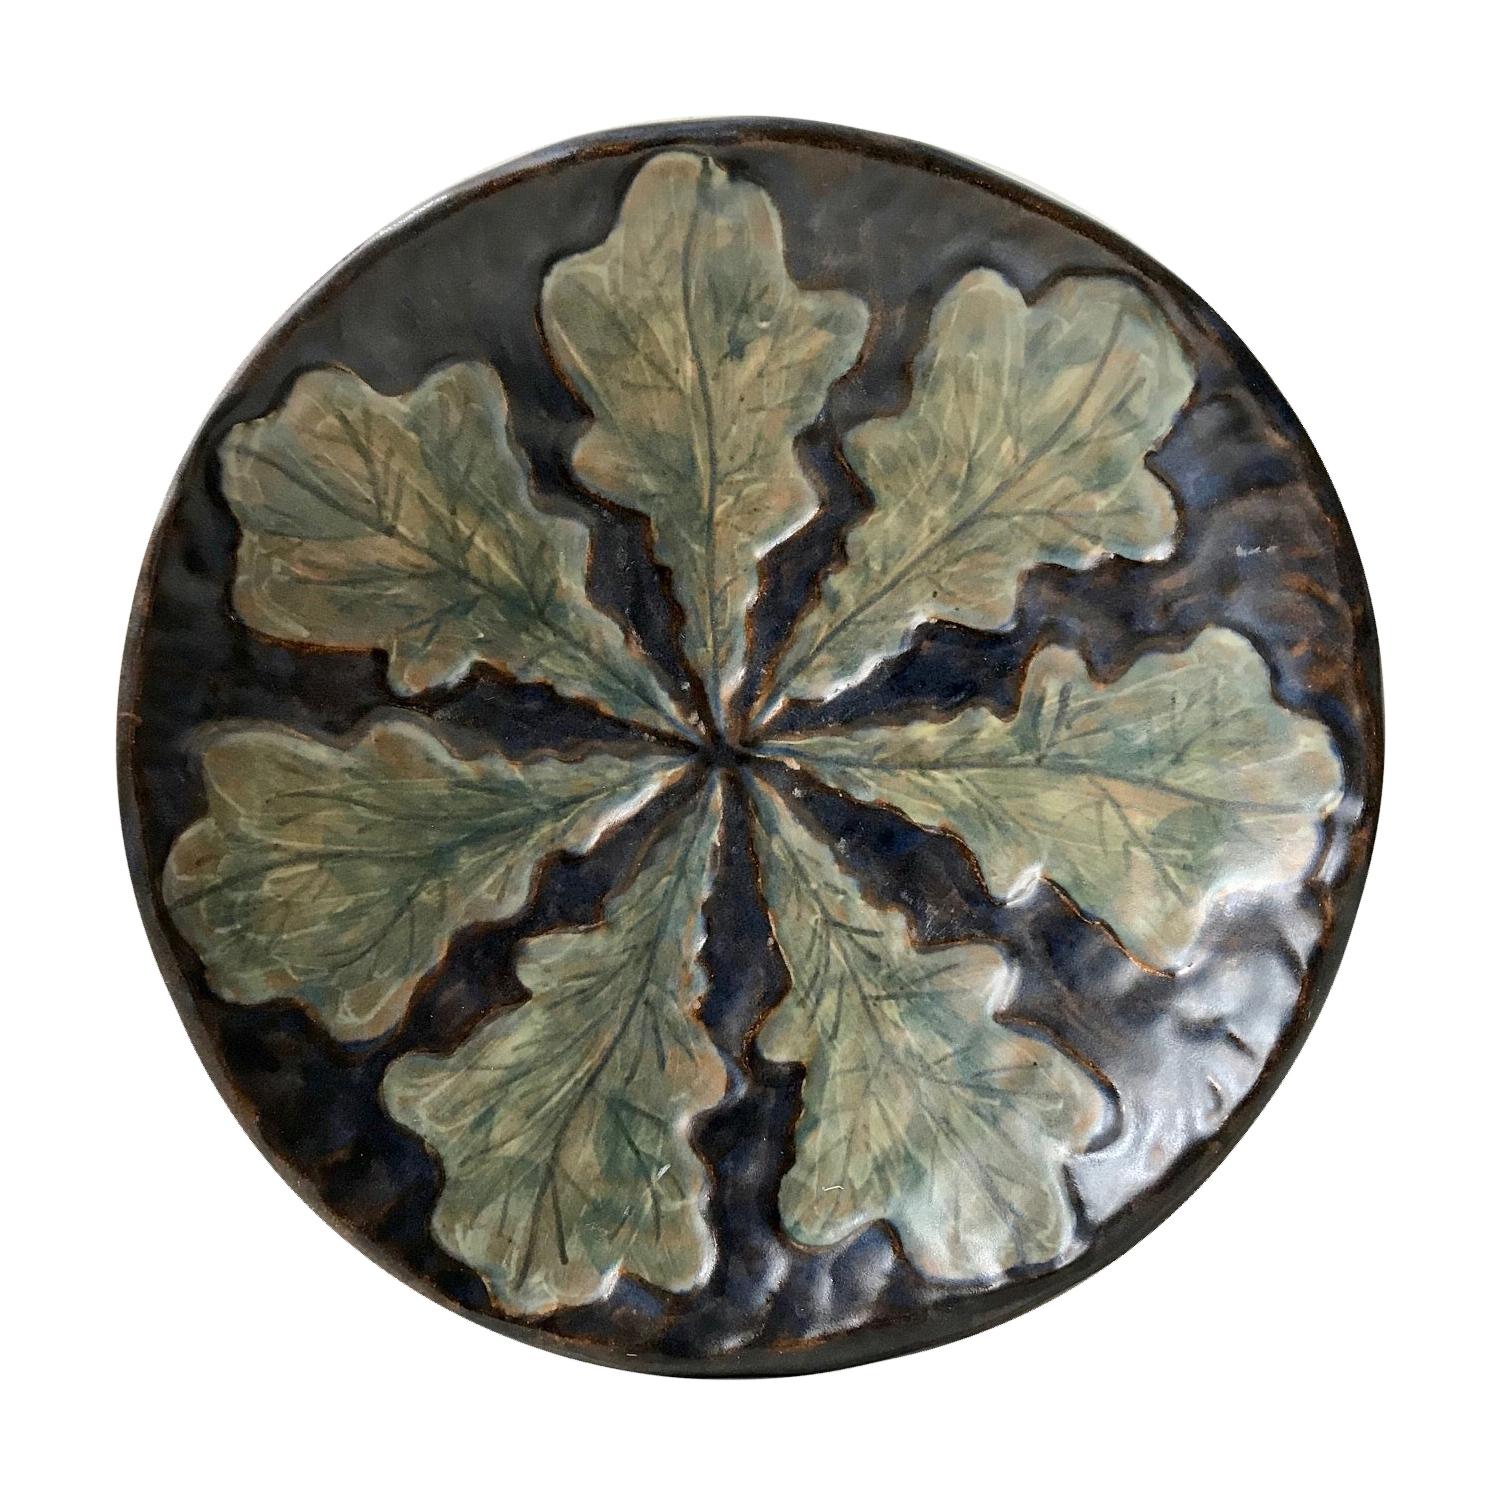 Art Deco Glazed Stoneware Dish with Leaves, Emil Ruge, 1930s For Sale